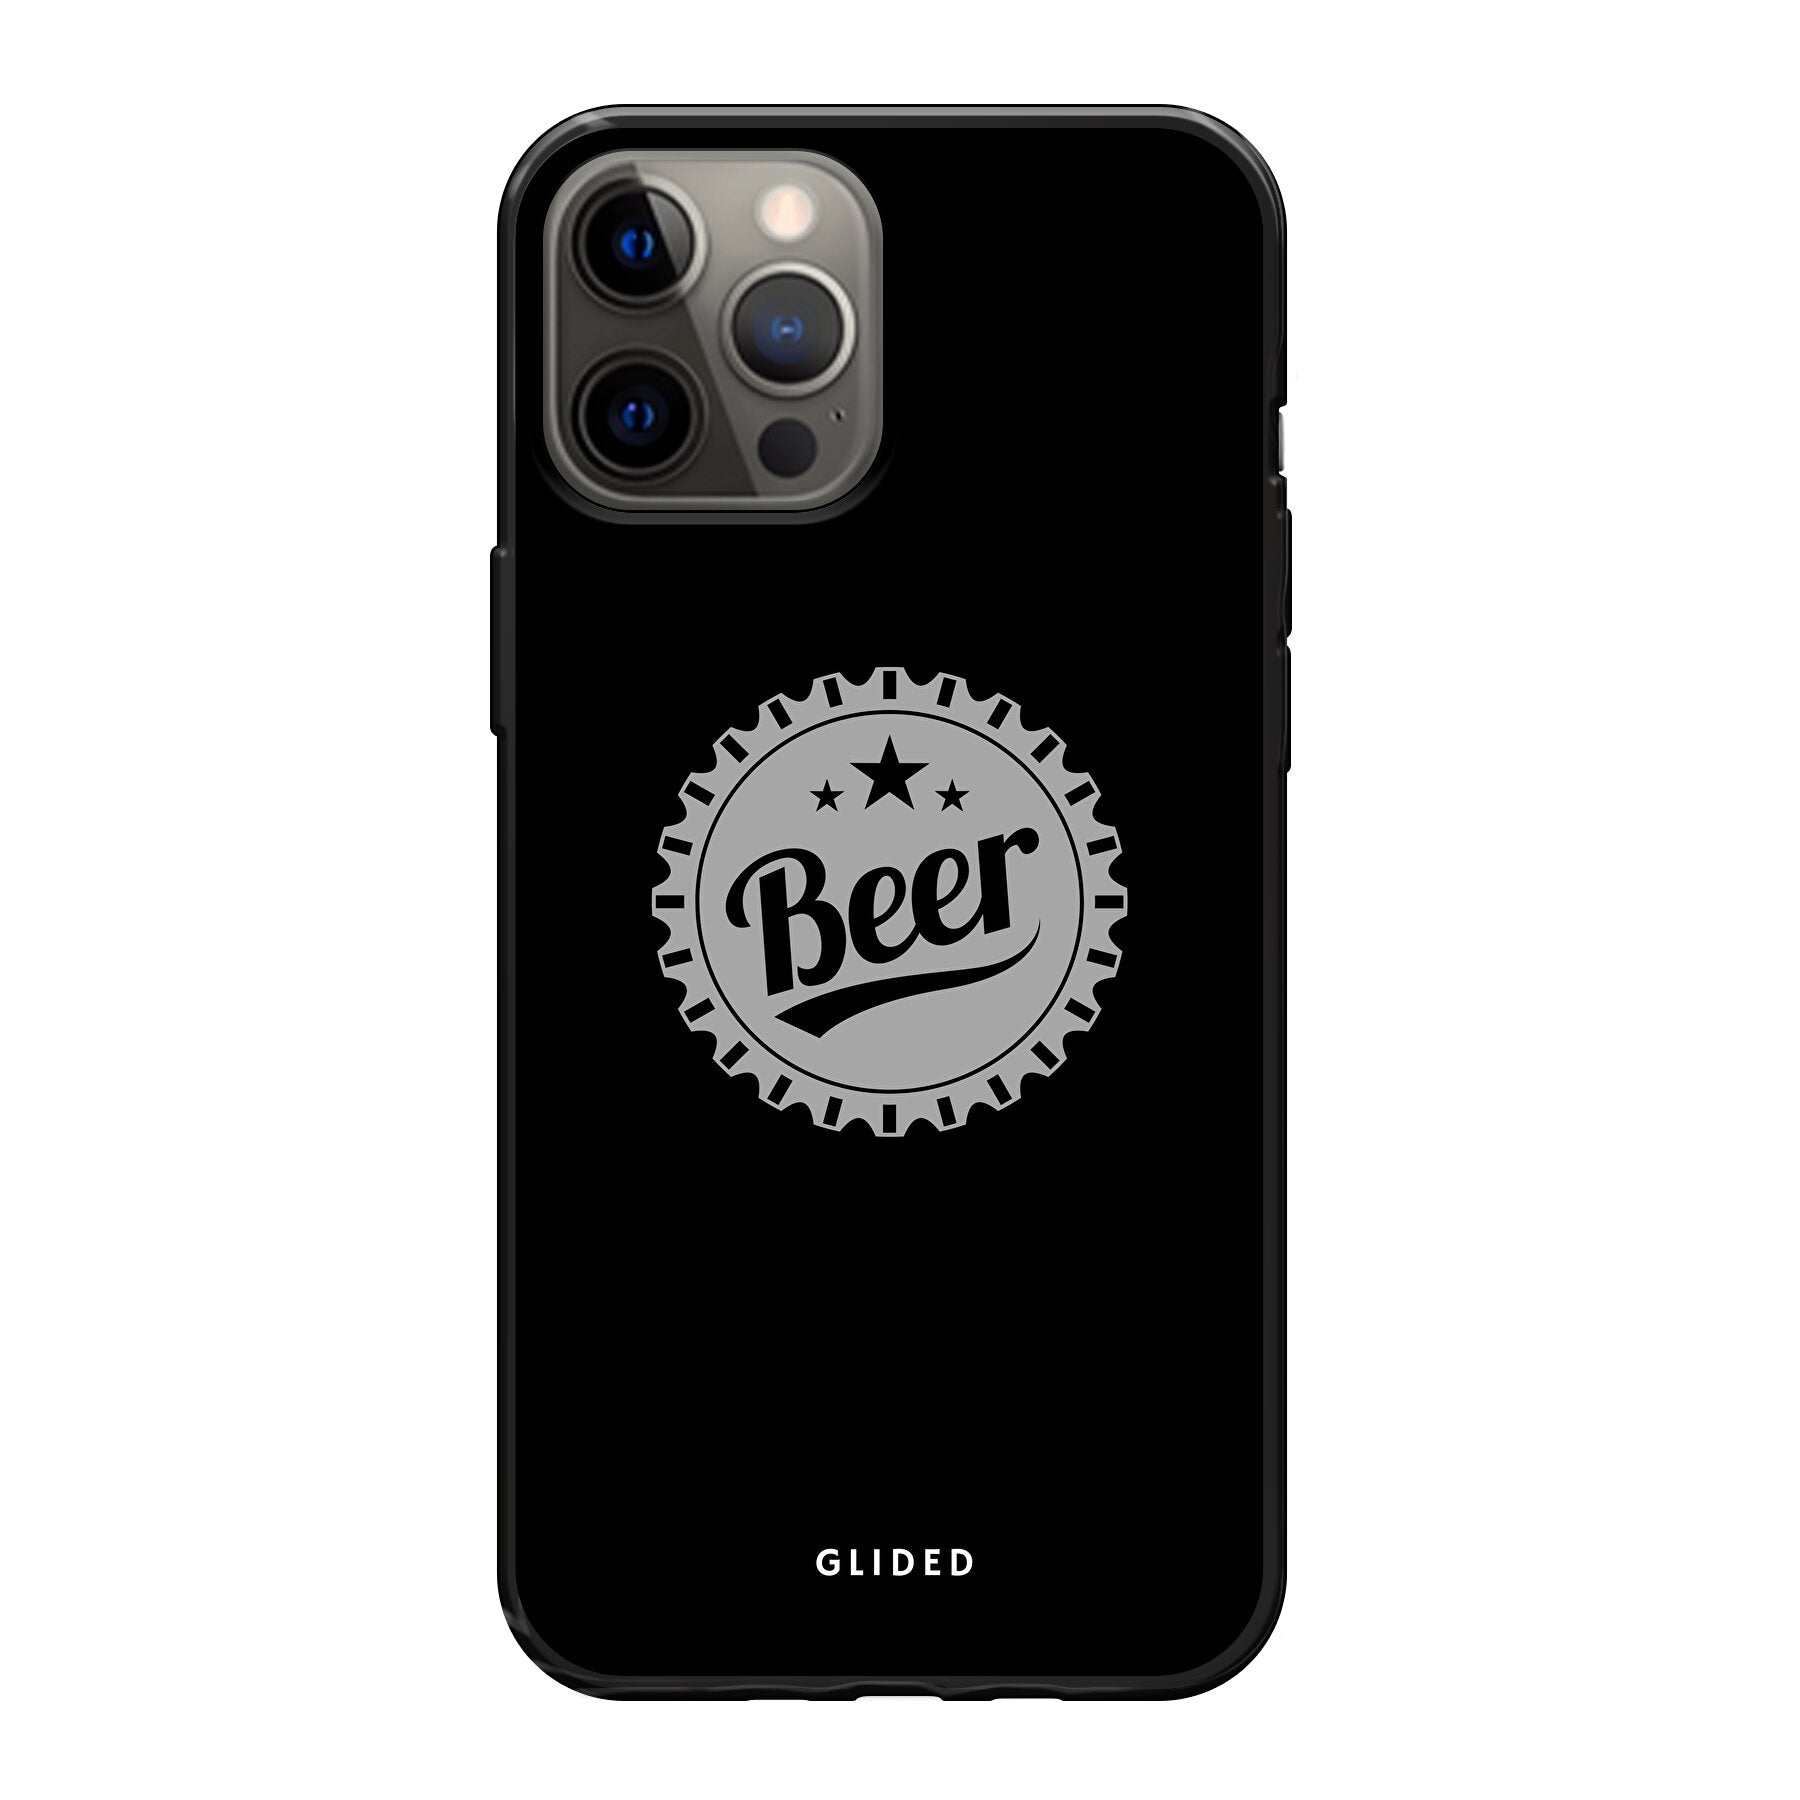 Cheers - iPhone 12 Pro Max - Soft case